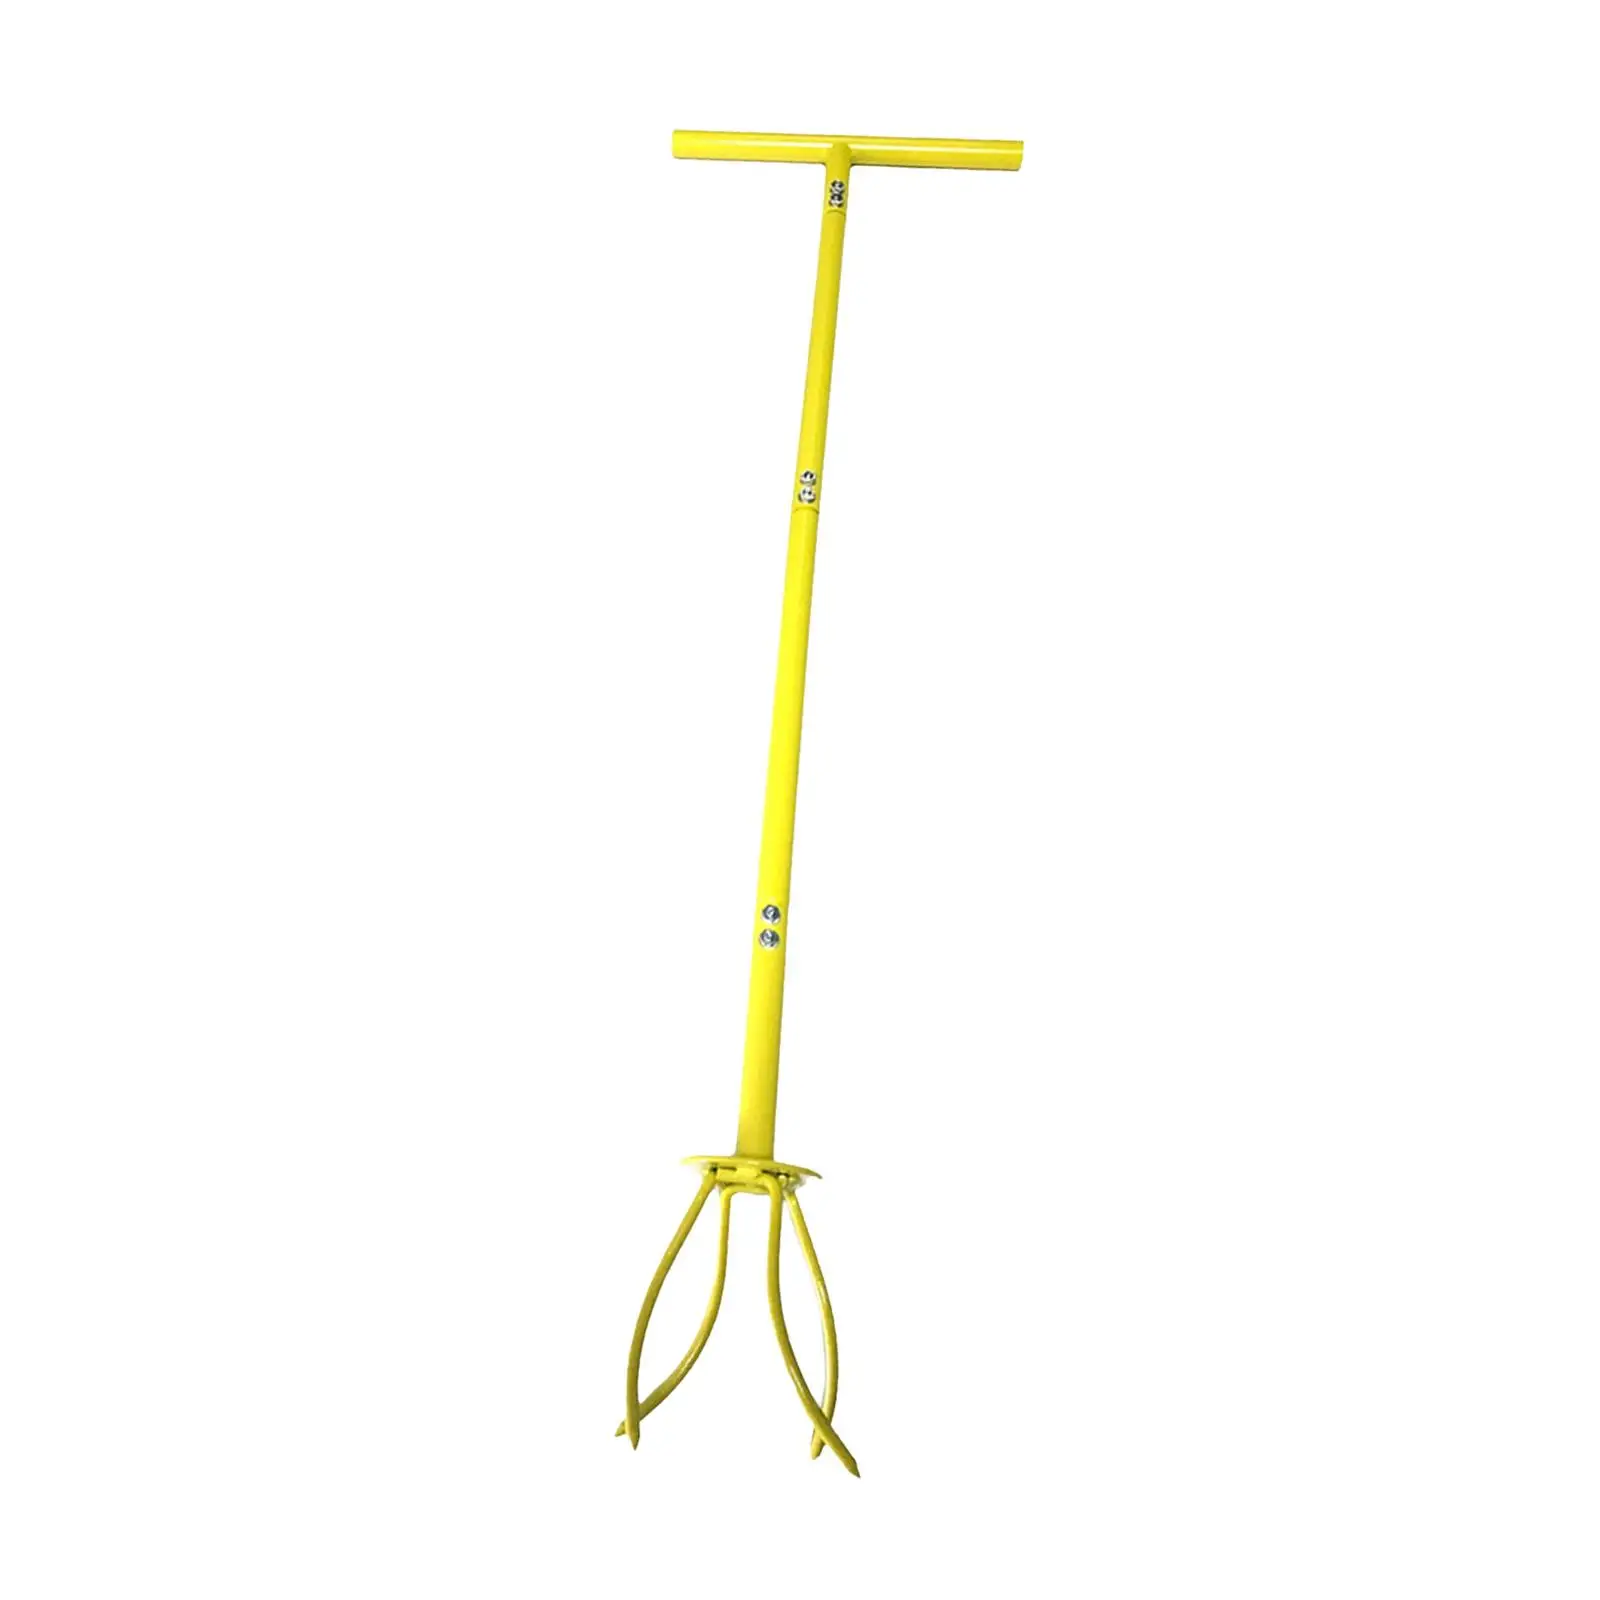 Manual Hand Tiller for Cultivate, Loosen, Aerate Durable Gardening Claw Tool Cultivator Manual Soil Grabber Adjustable Handle